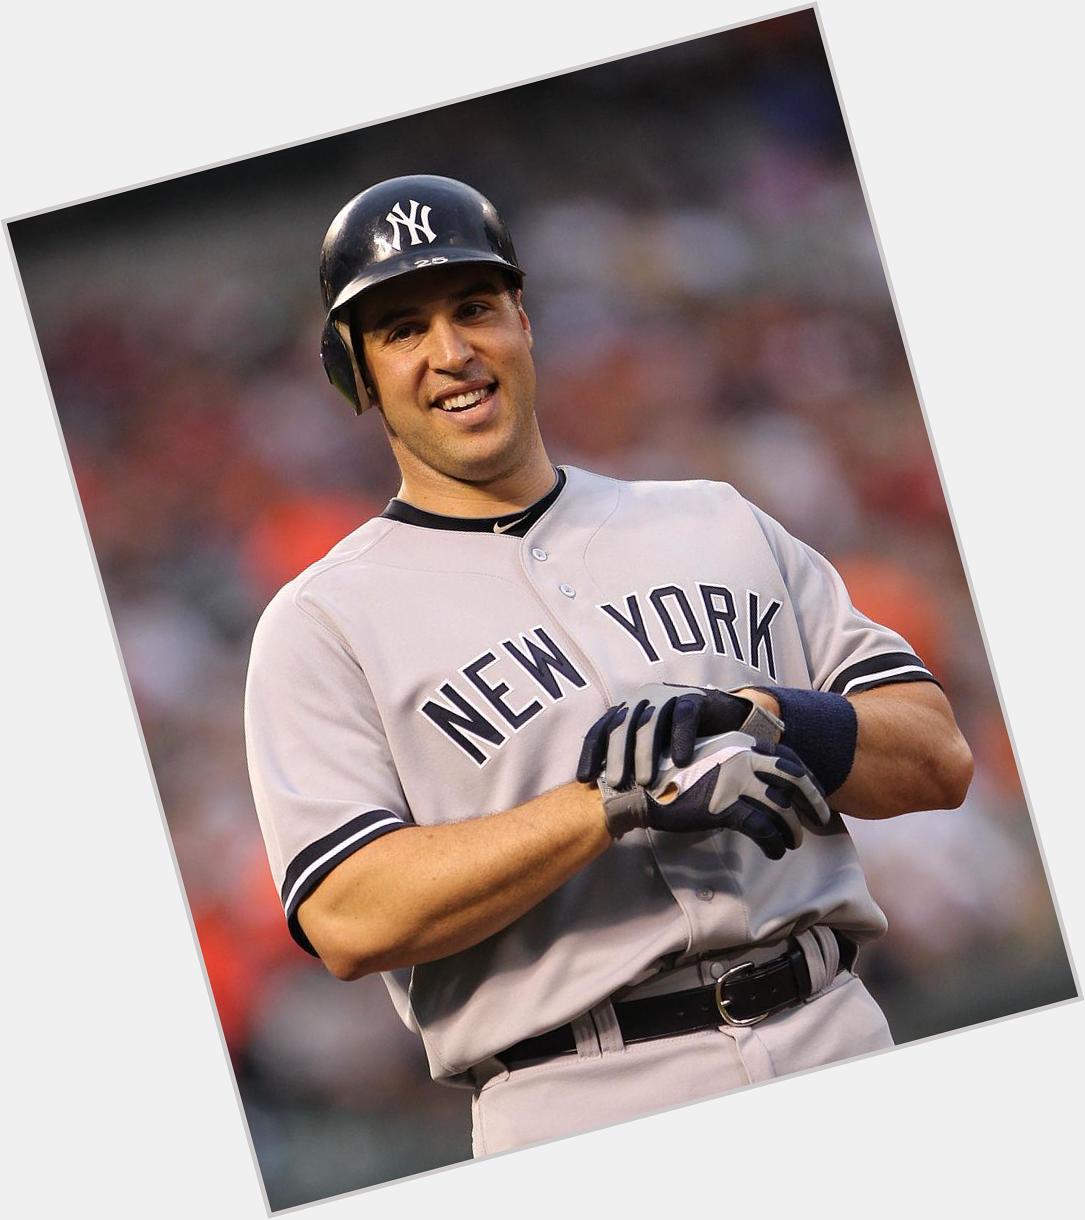 Happy 35th birthday to the one and only Mark Teixeira! Congratulations 